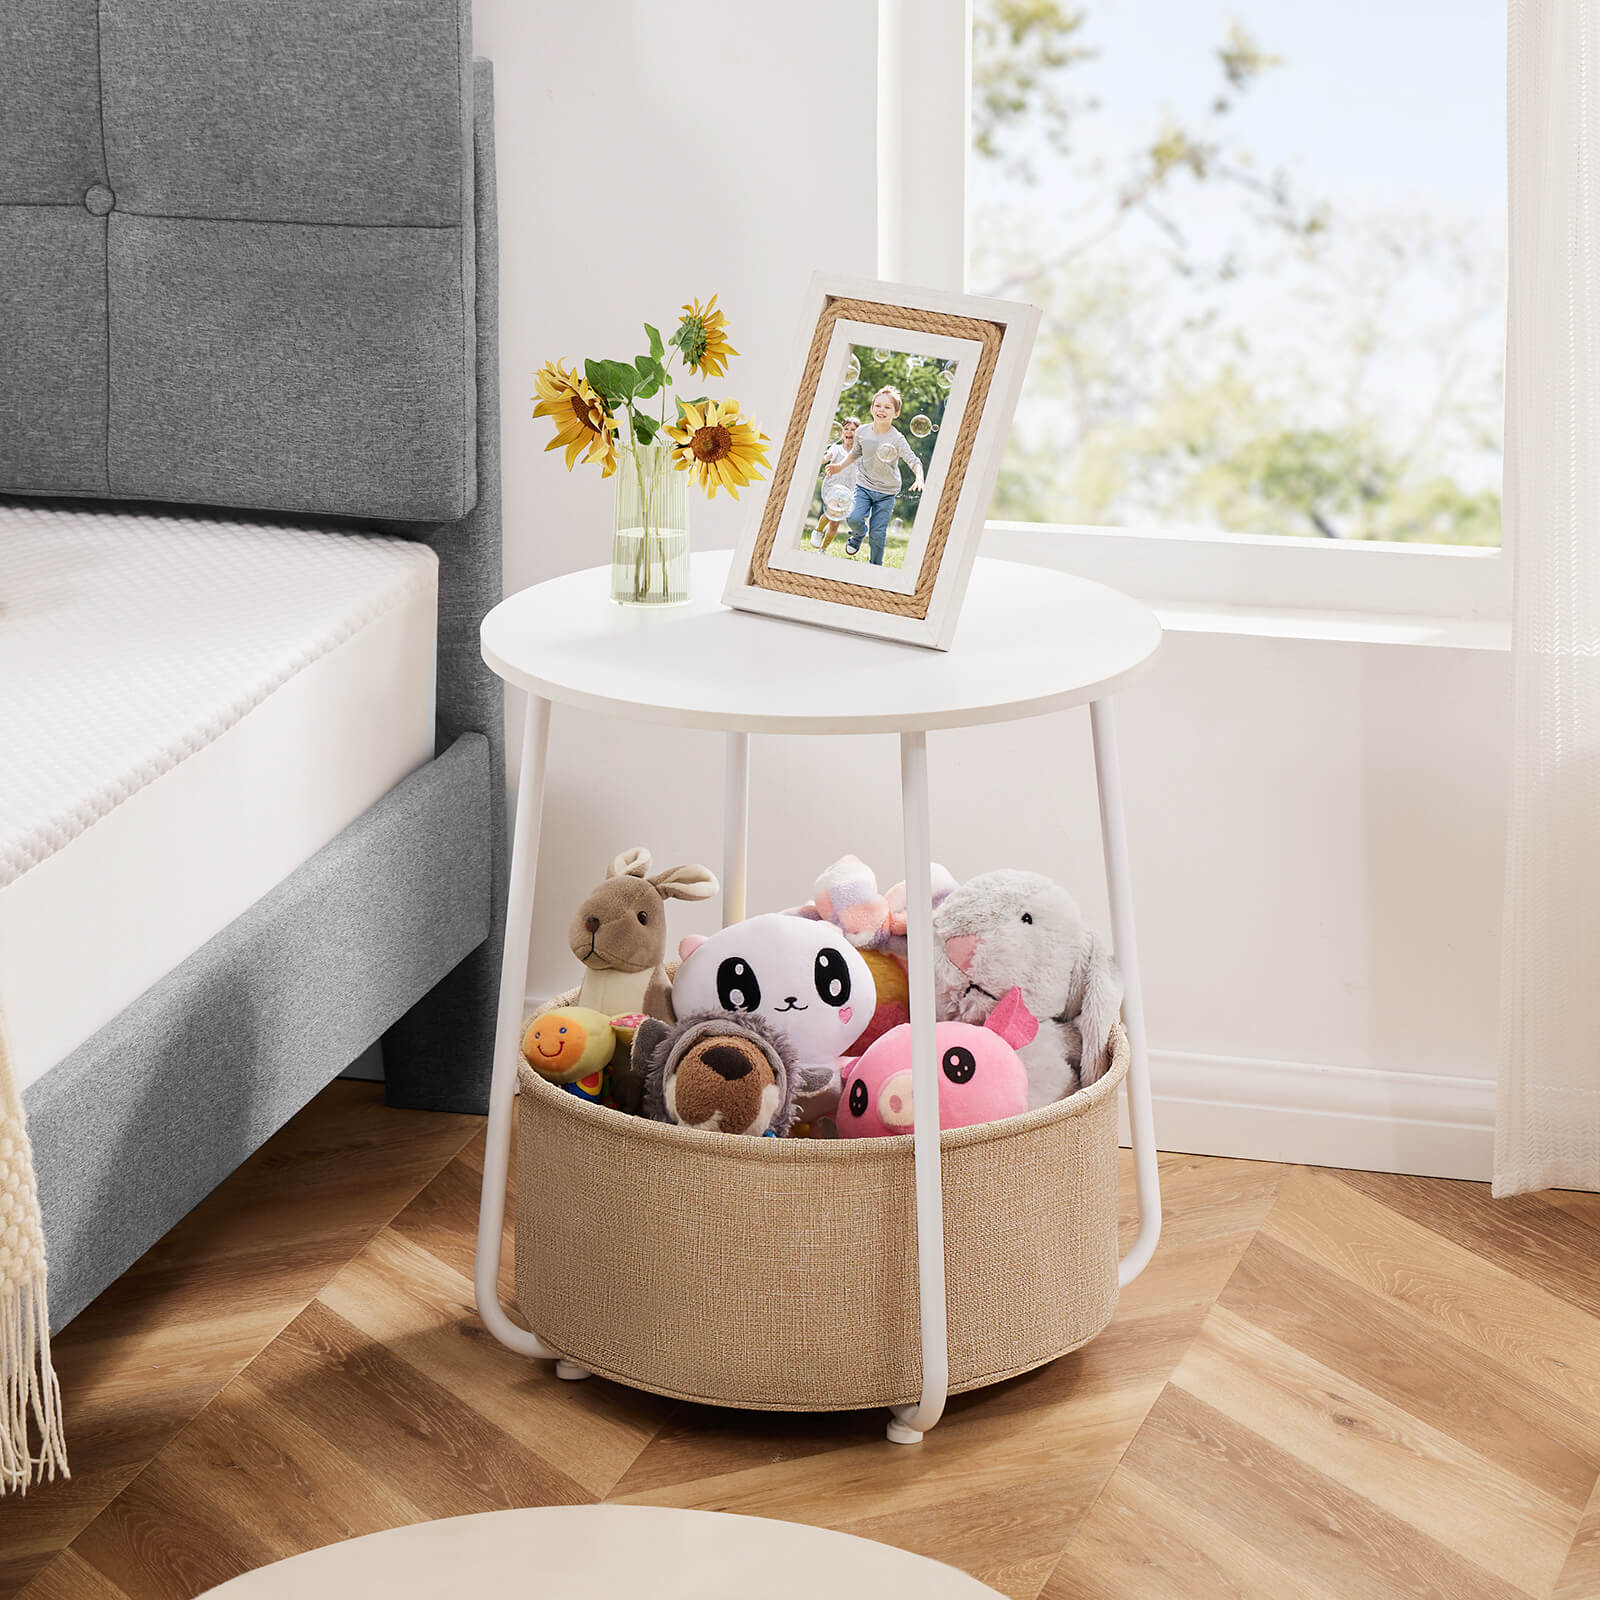 Compact nightstand, sofa side table, can be used in living room, nursery room, bedroom, comes with fabric basket for easy storage